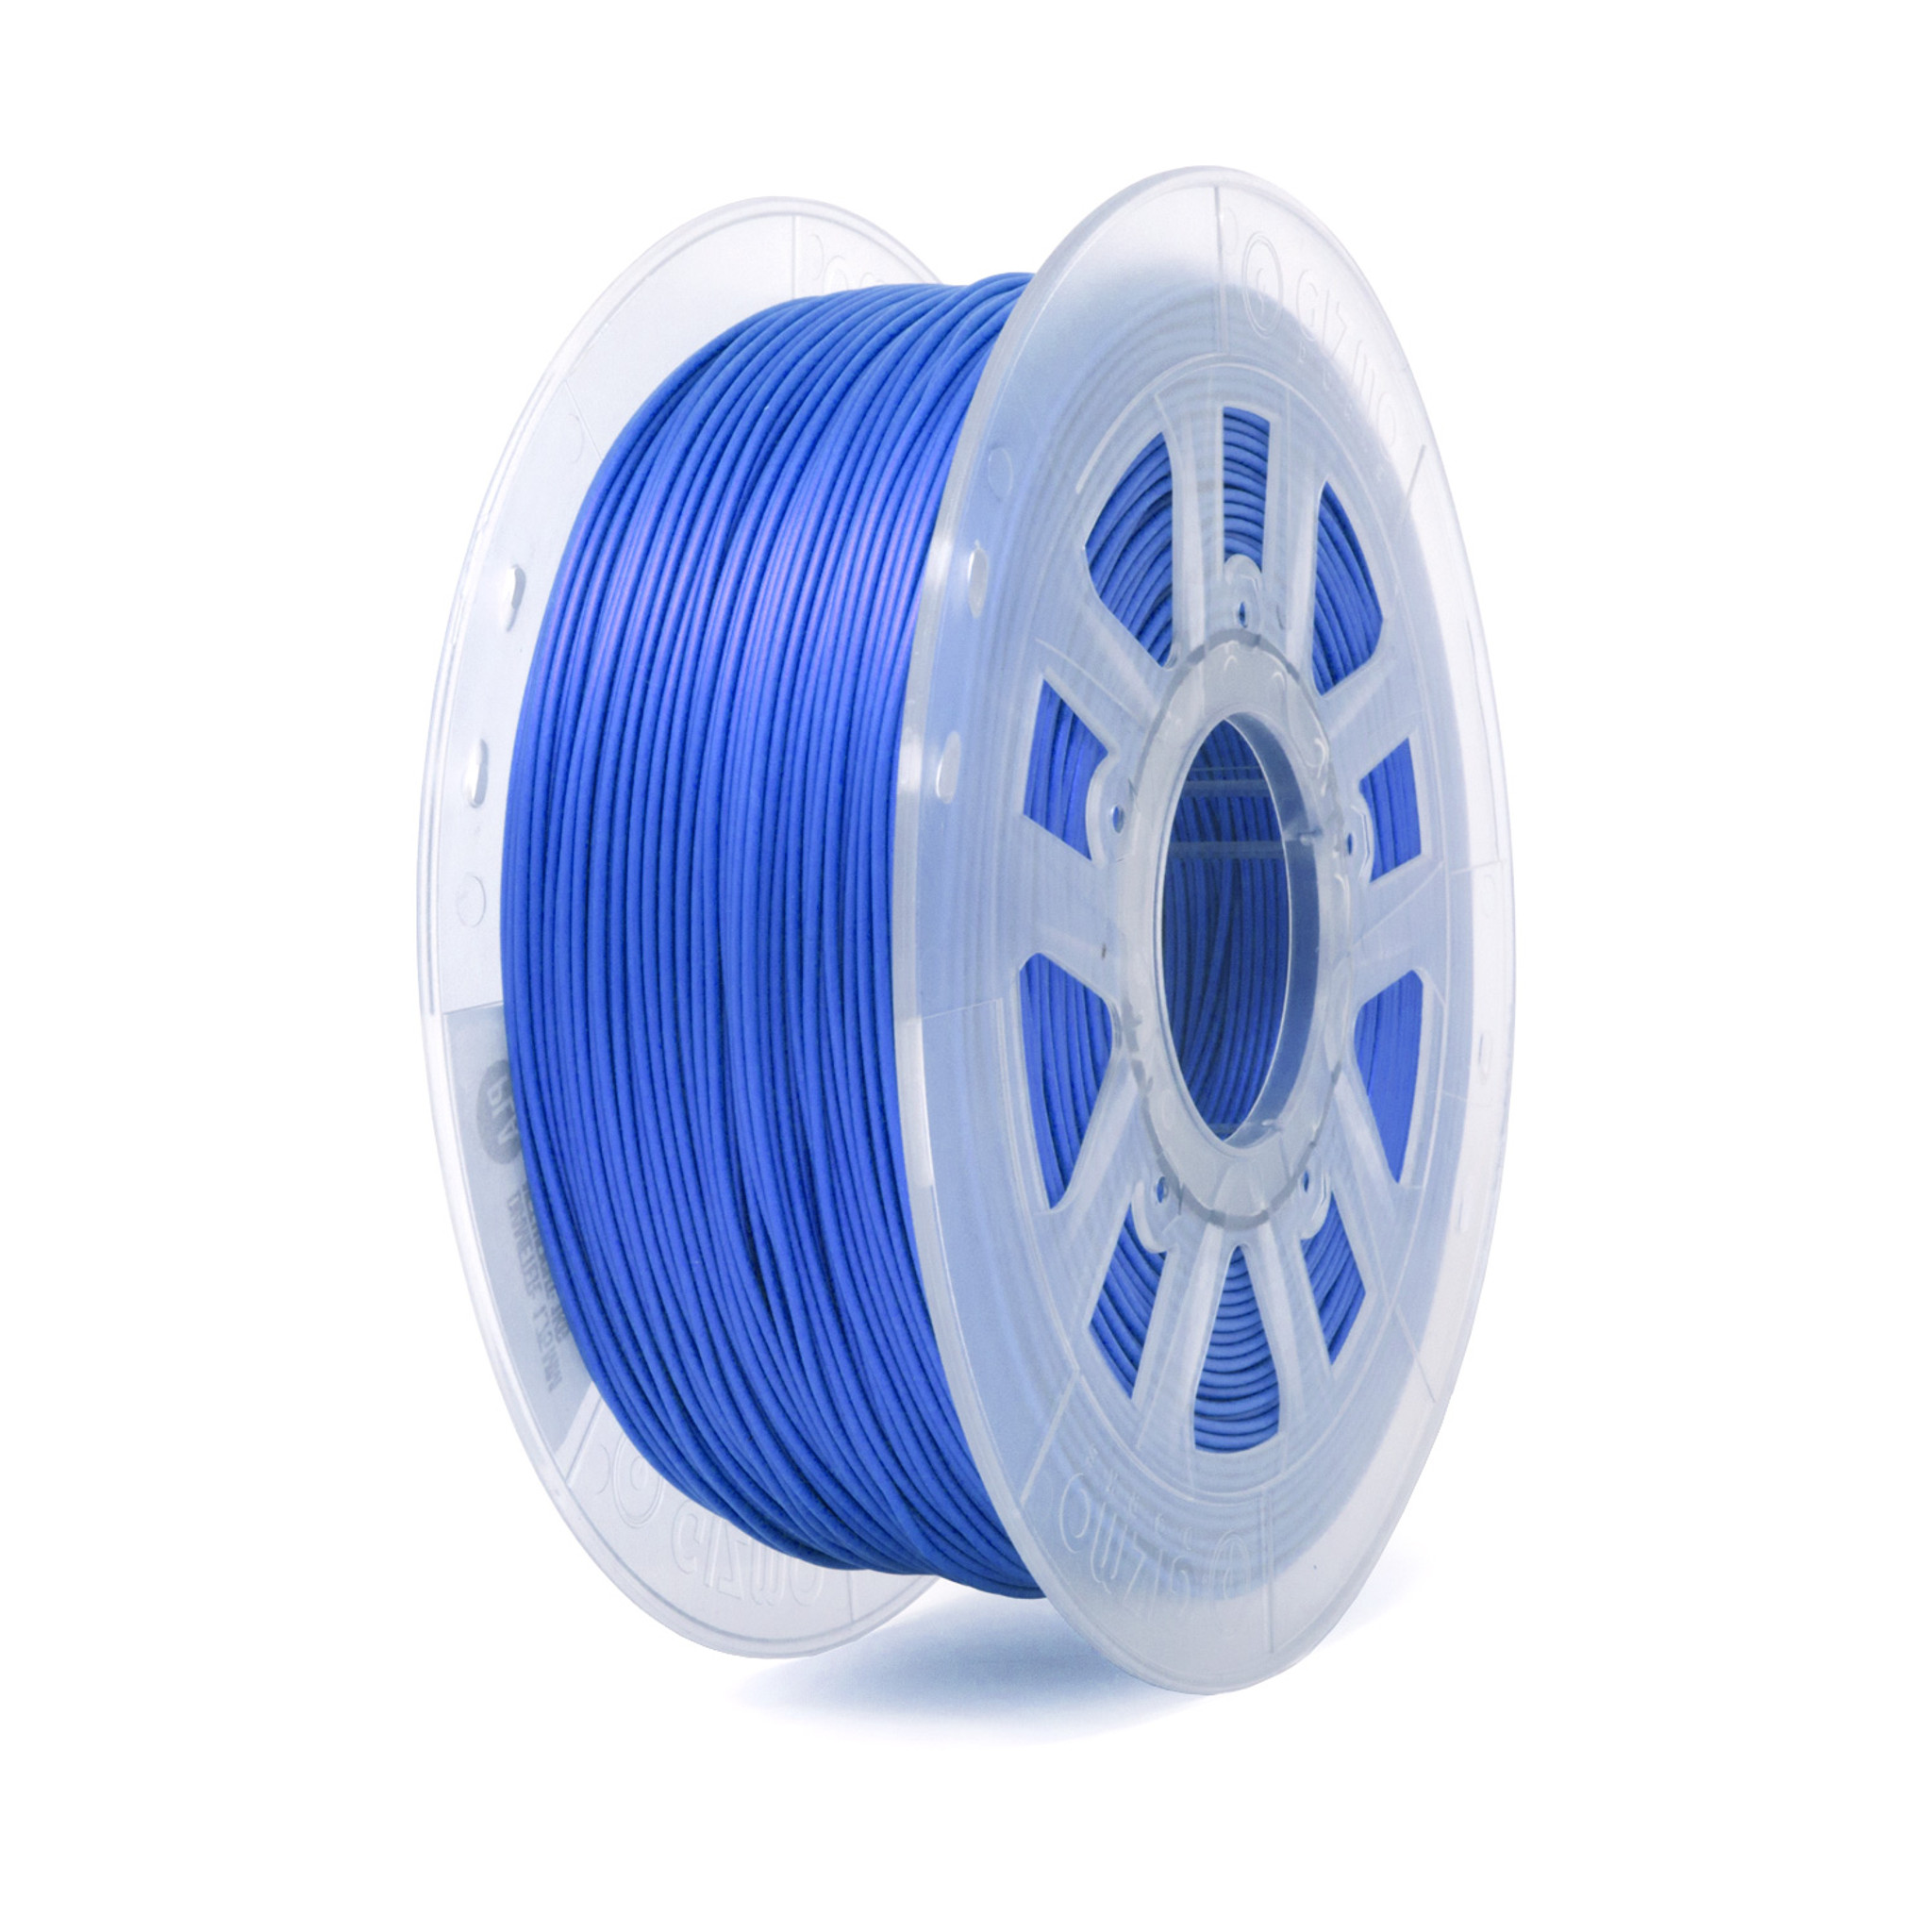 Print With Smile 3D filament ABS made of premium materials.